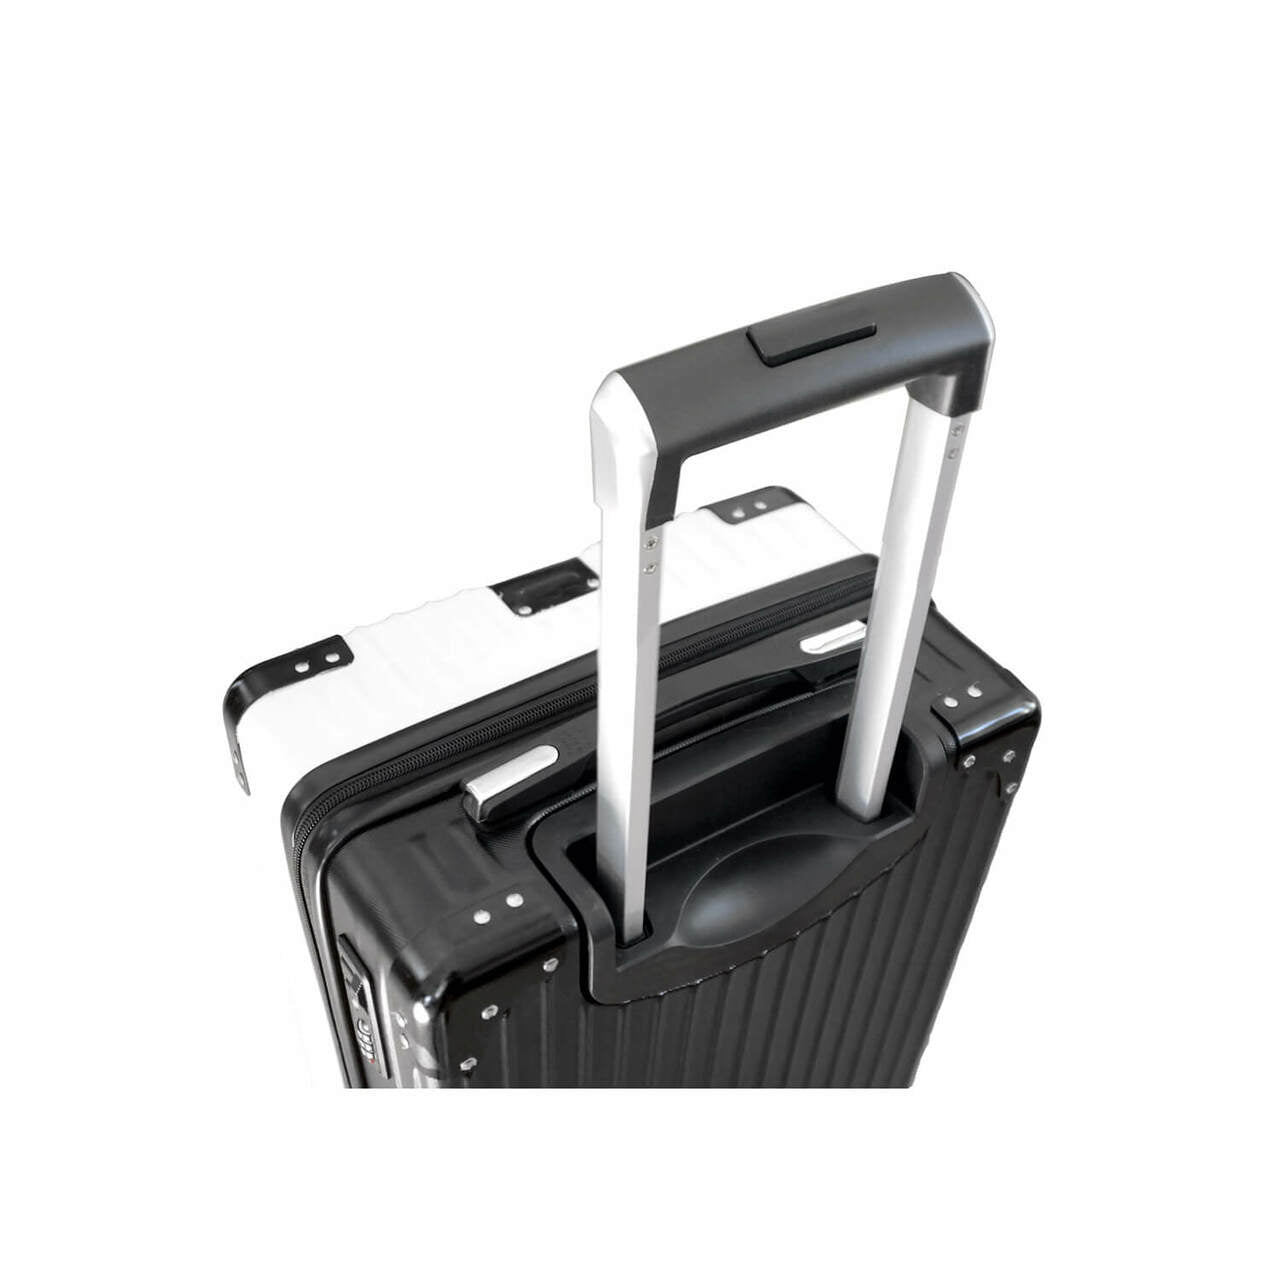 Indianapolis Colts Carry-On Hardcase Spinner Luggage